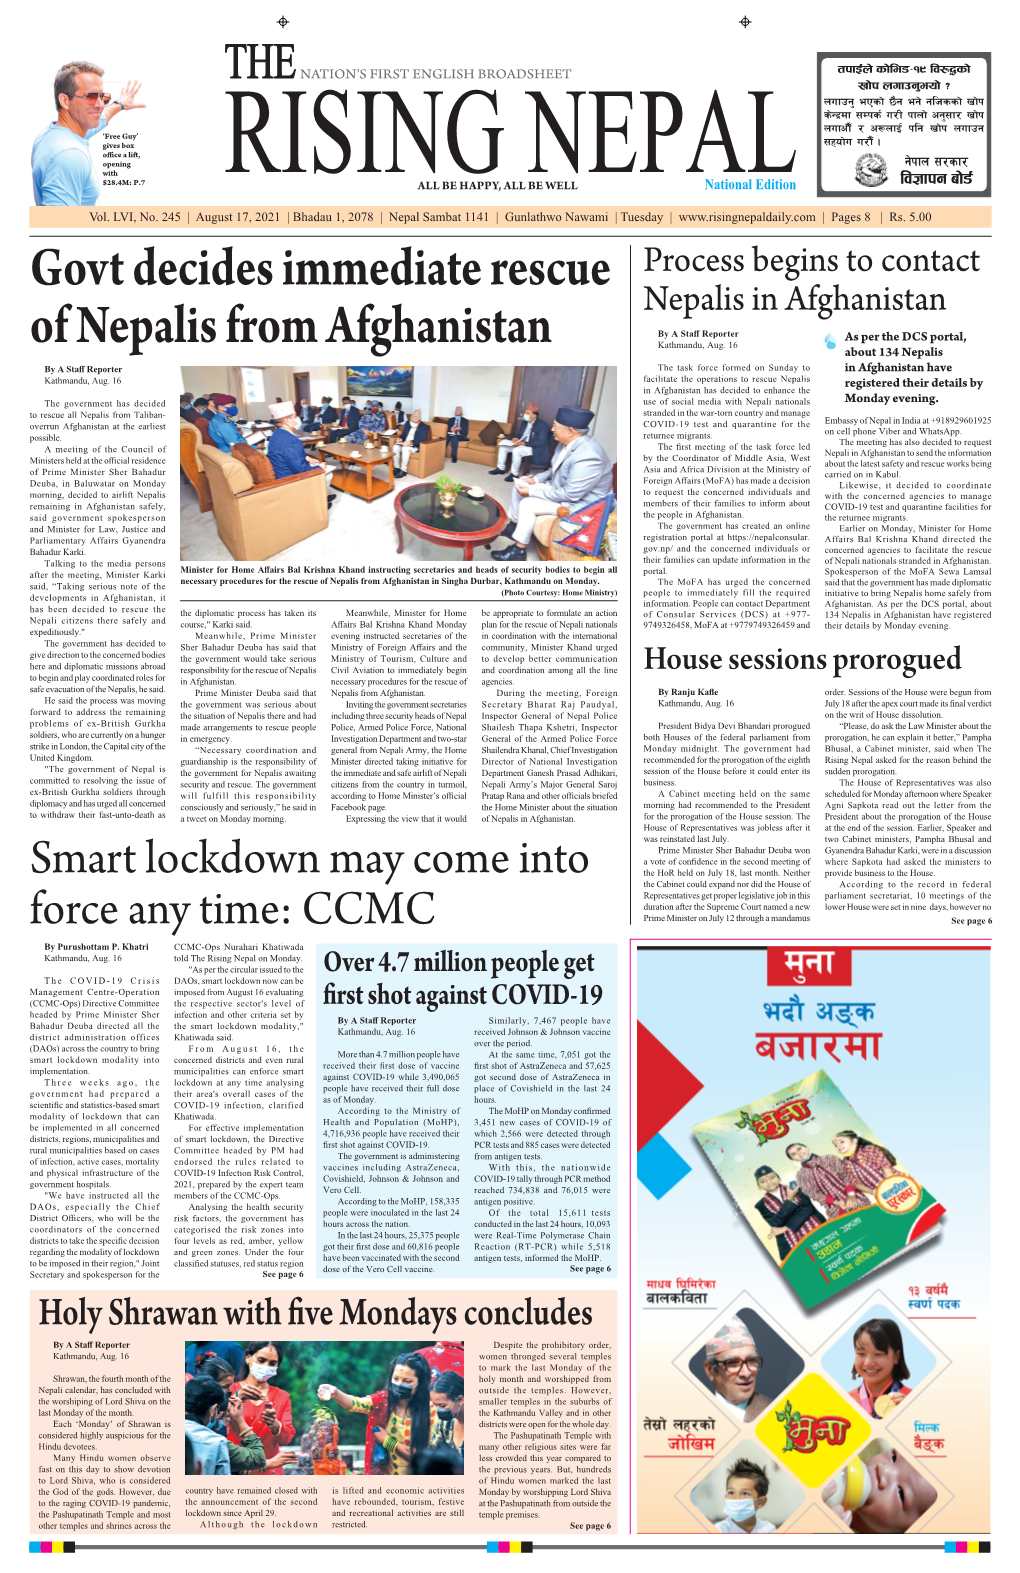 Govt Decides Immediate Rescue of Nepalis From